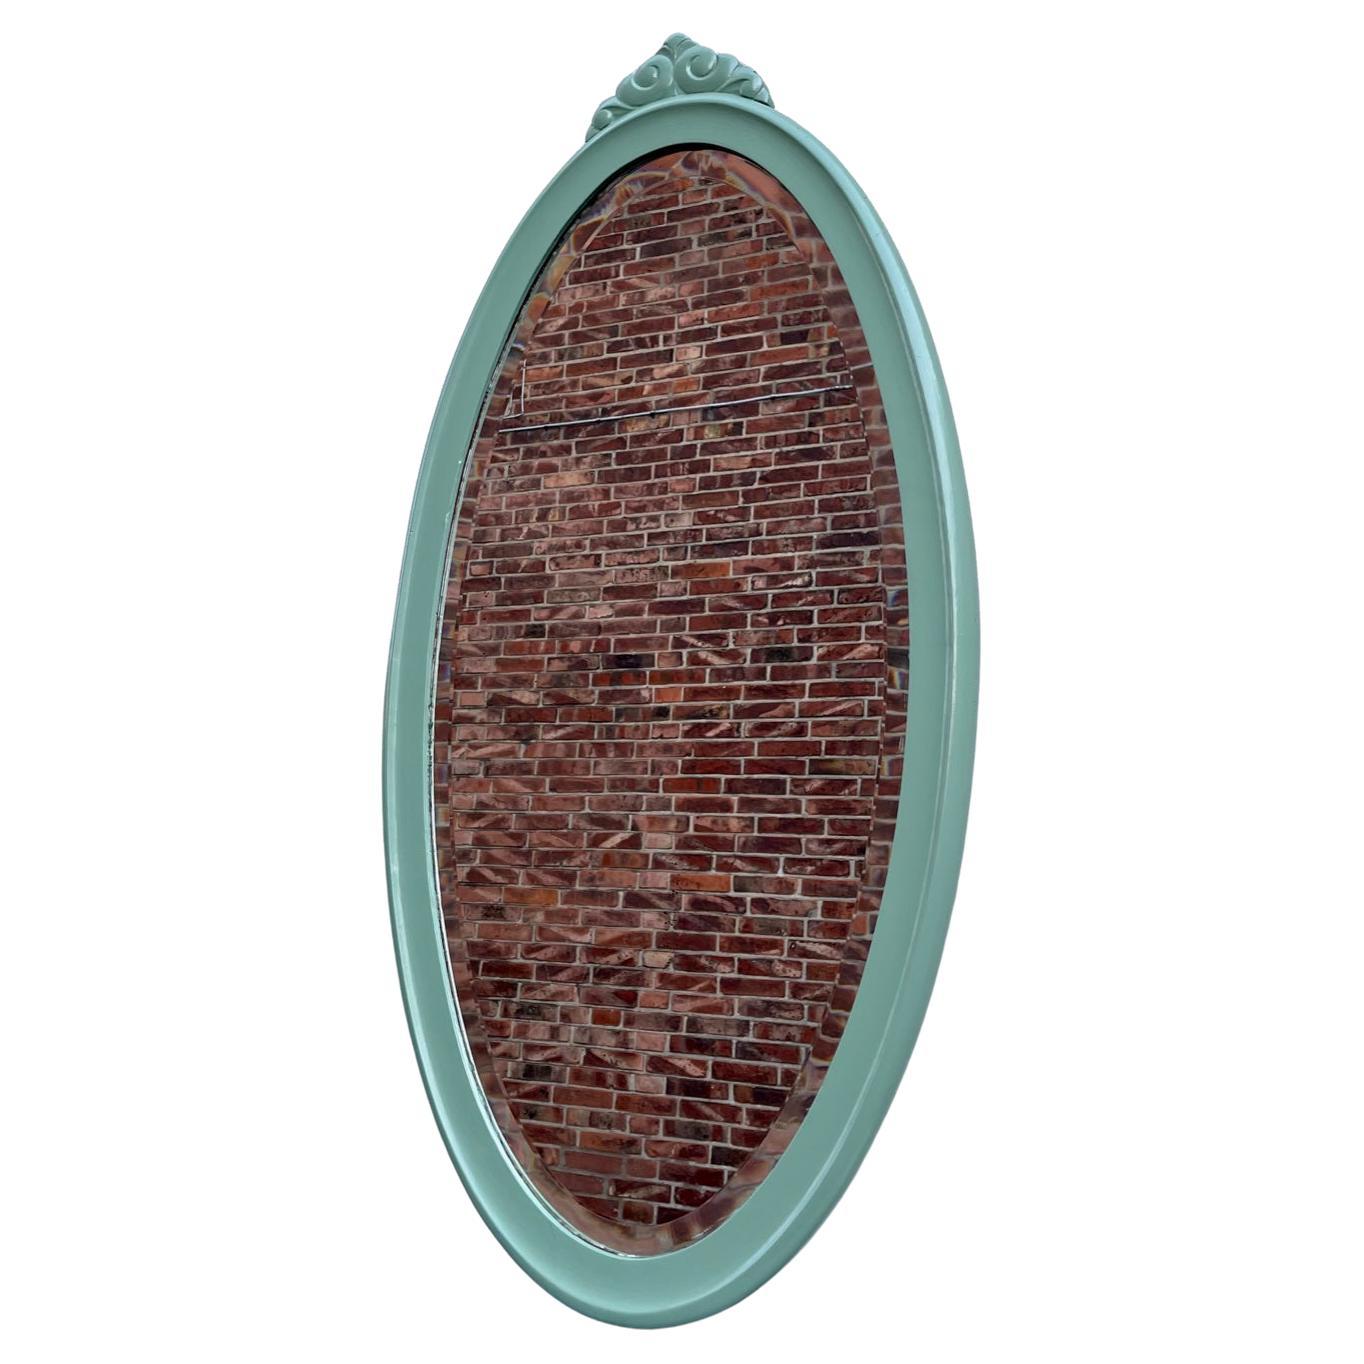 A large 'full figure' (109 cm) mirror in painted pine. It features a beveled mirror glass and rounded profiles that compliments its soft oval shape. It was made by an anonymous cabinet maker in Scandinavia during the 1930s or 40s. The light green